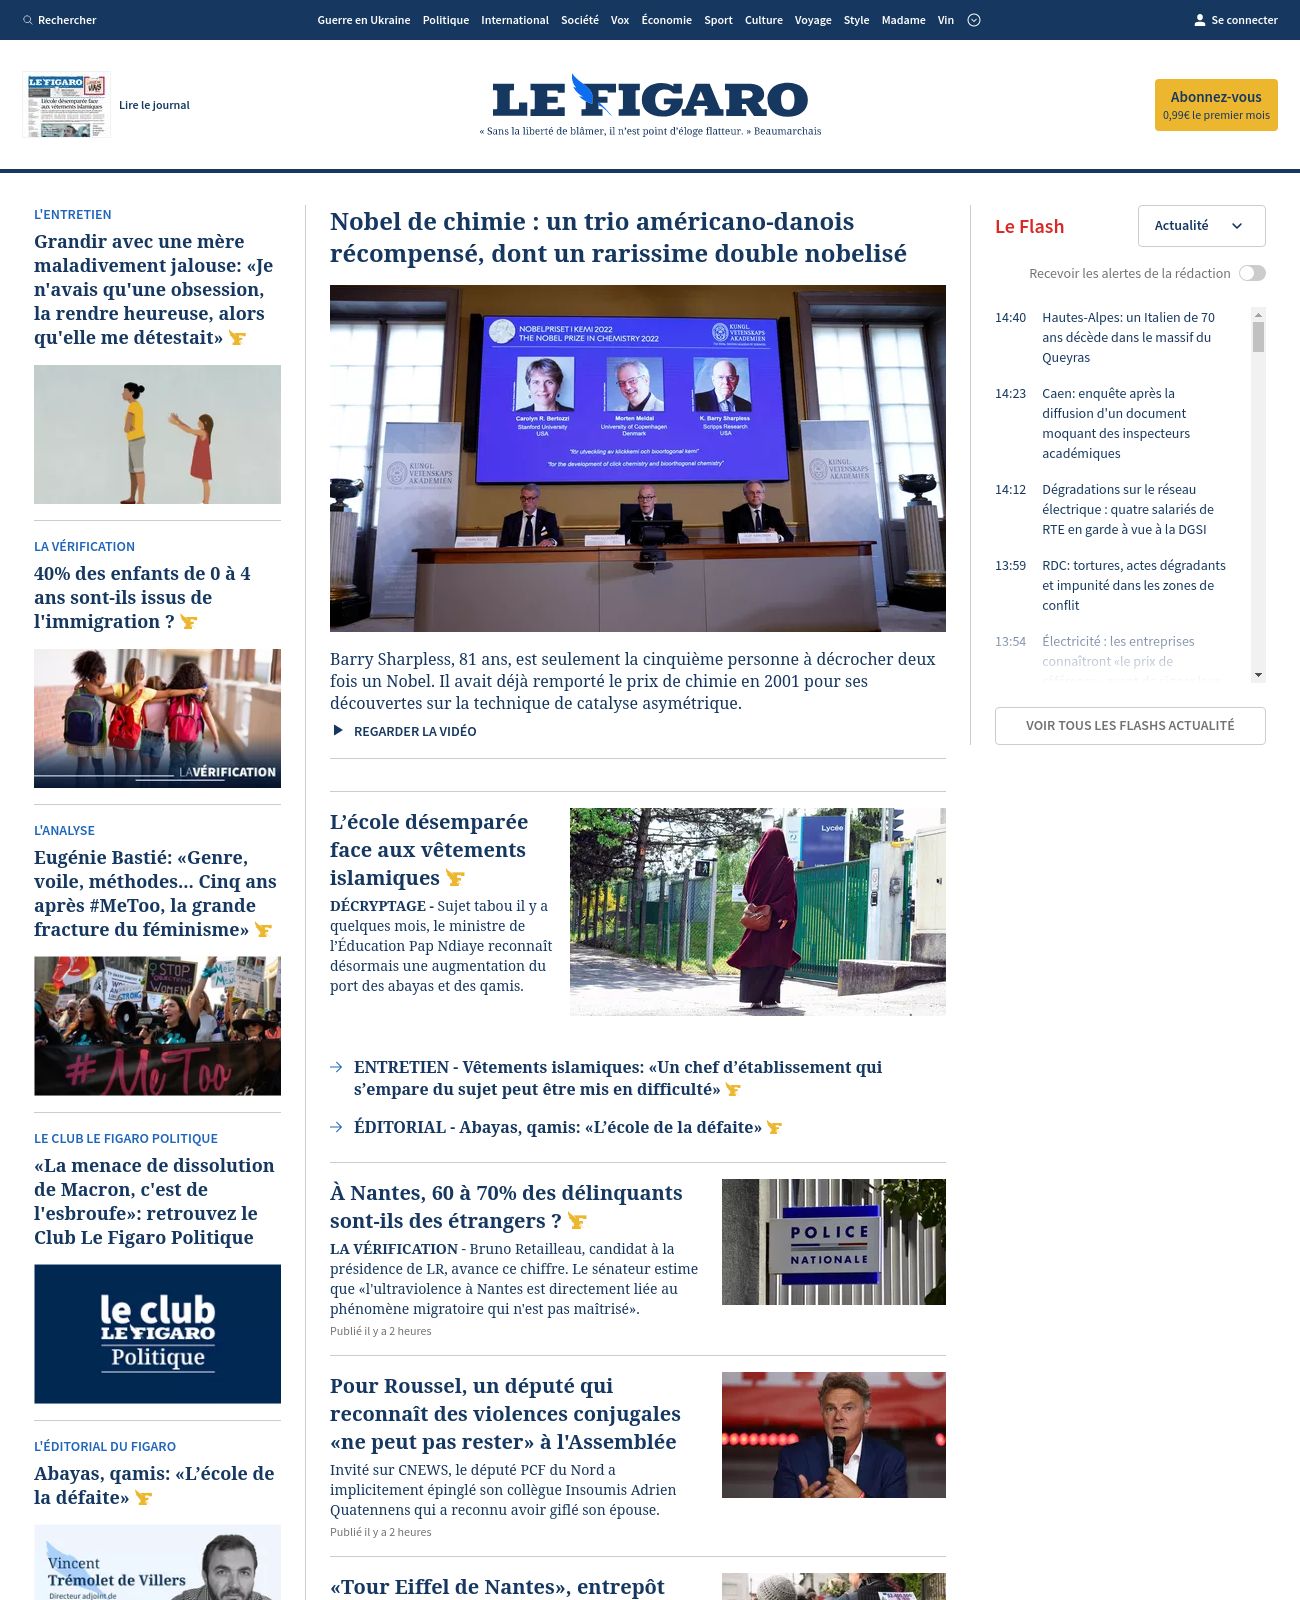 Le Figaro at 2022-10-05 15:15:37+02:00 local time